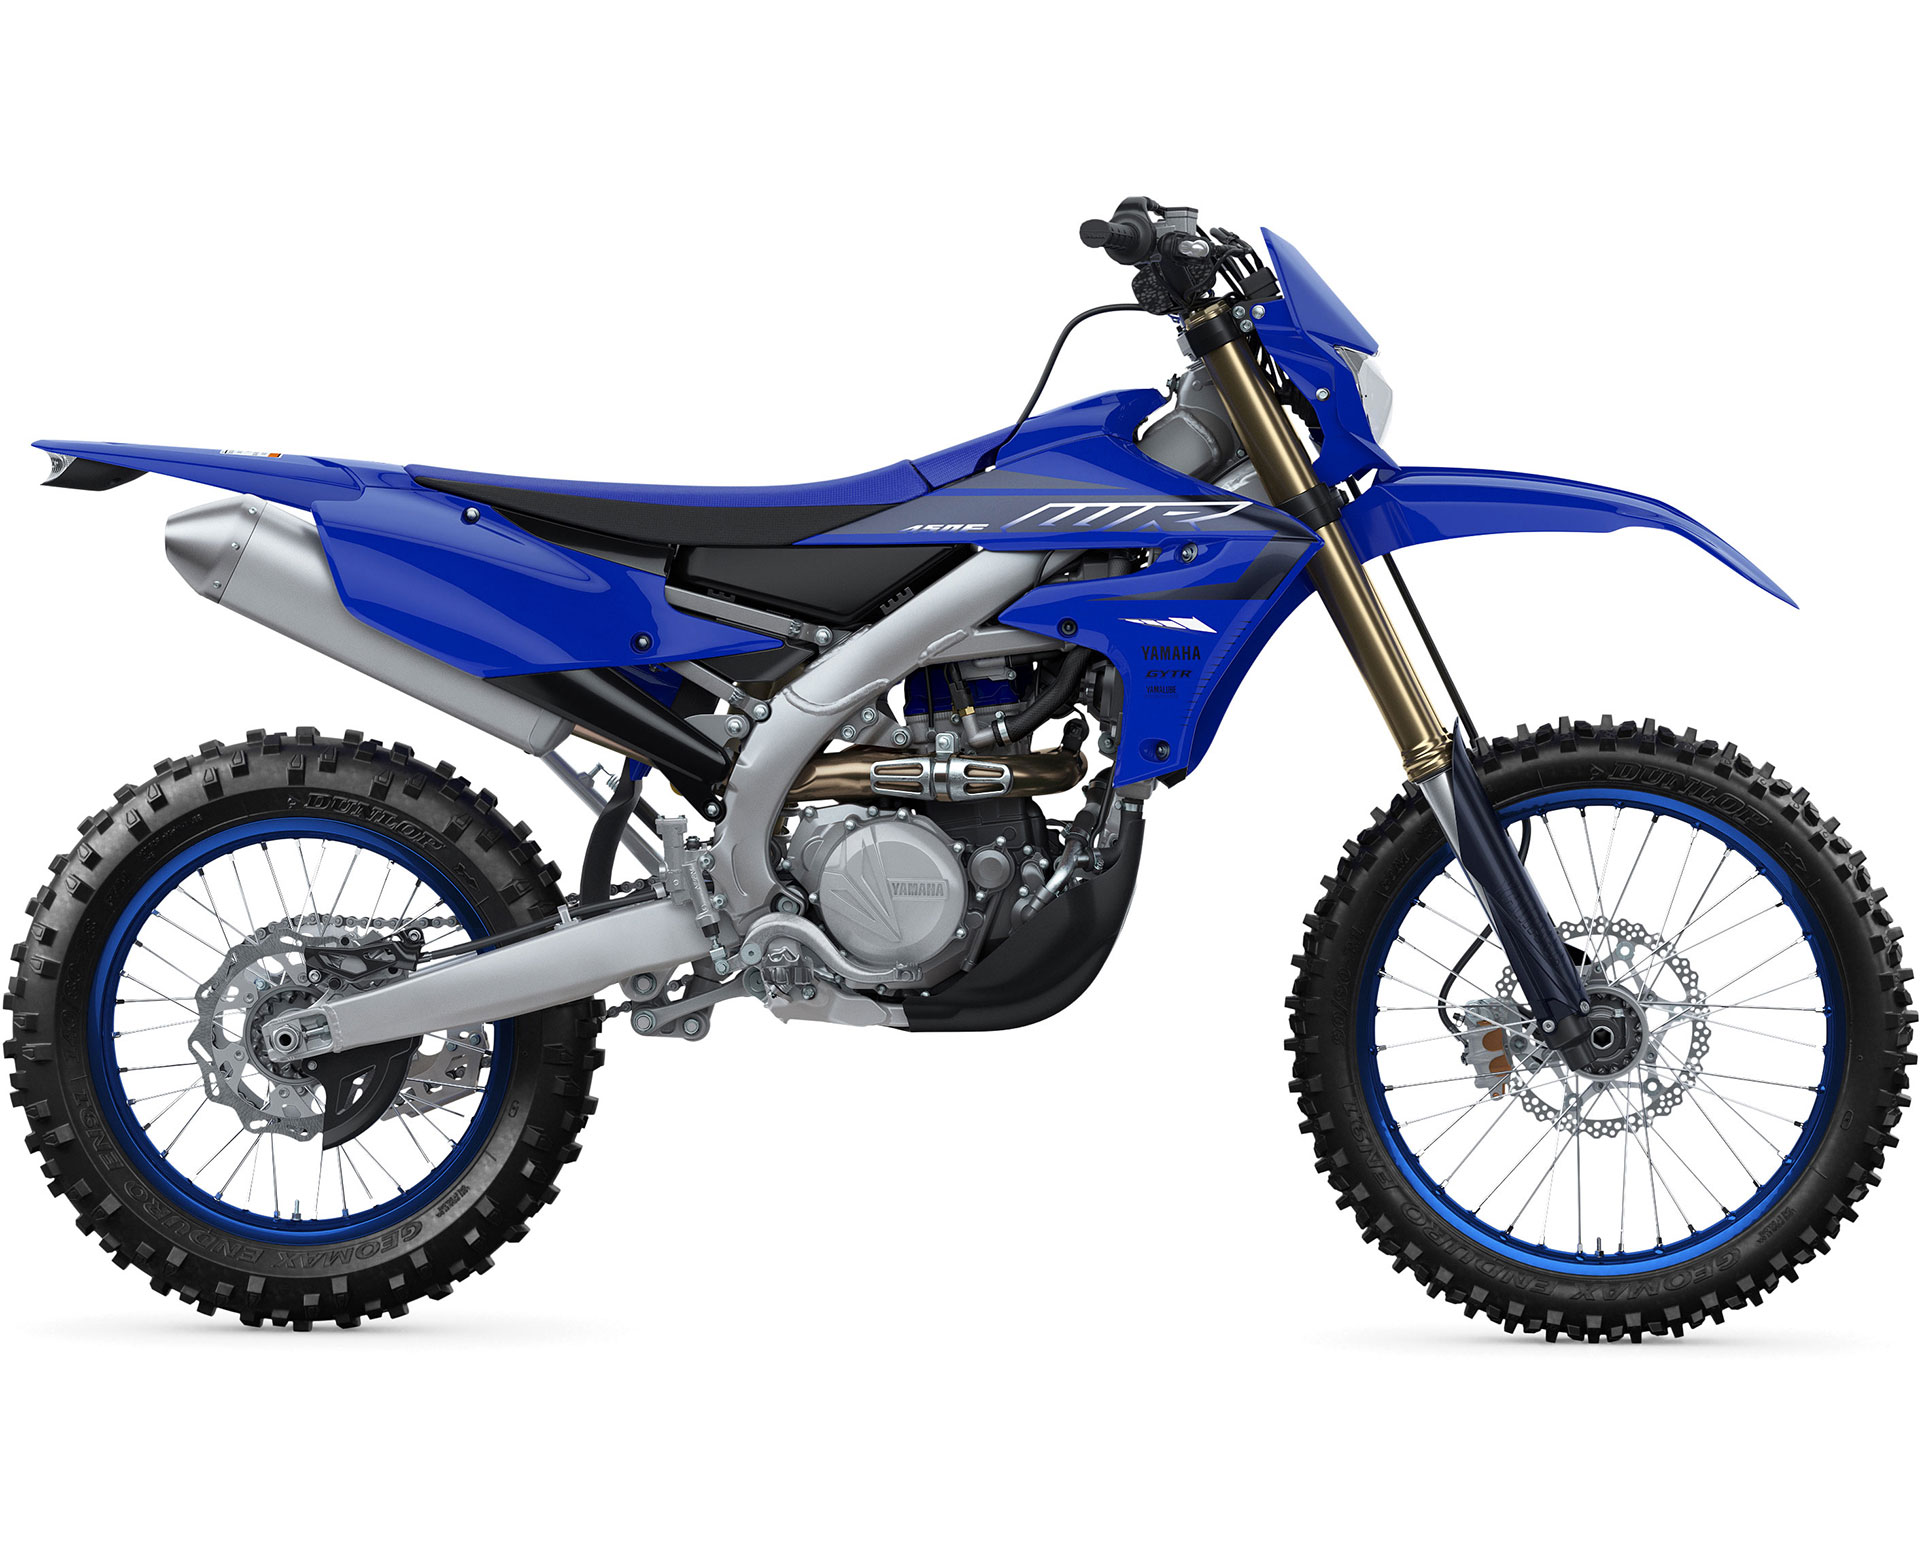 Thumbnail of your customized WR450F 2023